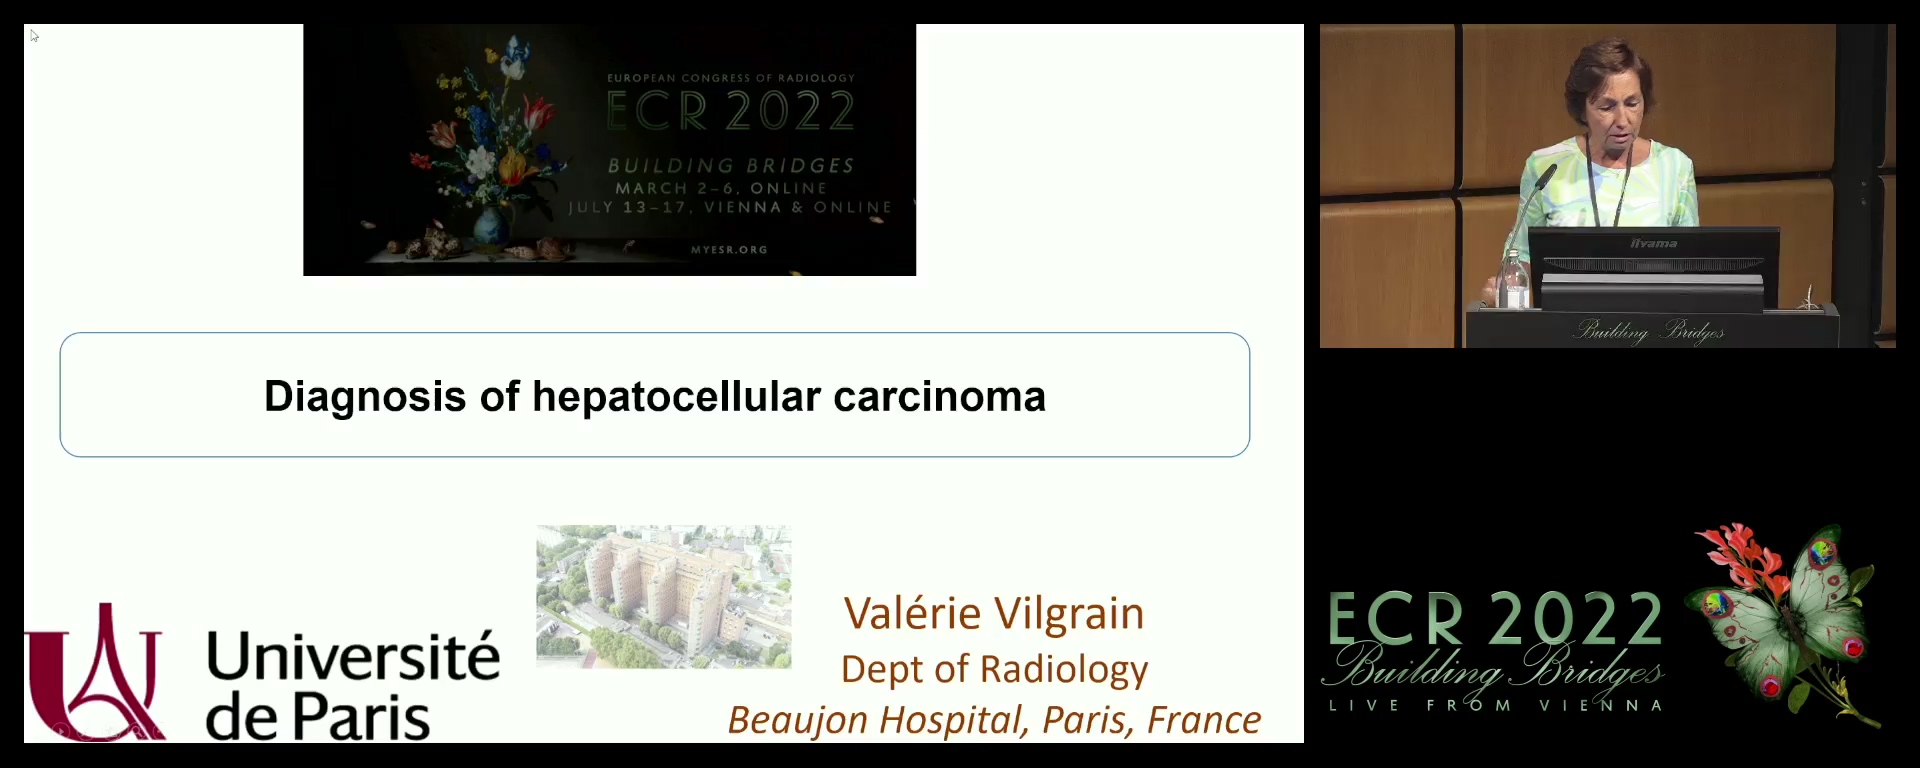 Diagnosis and follow-up of hepatocellular carcinoma